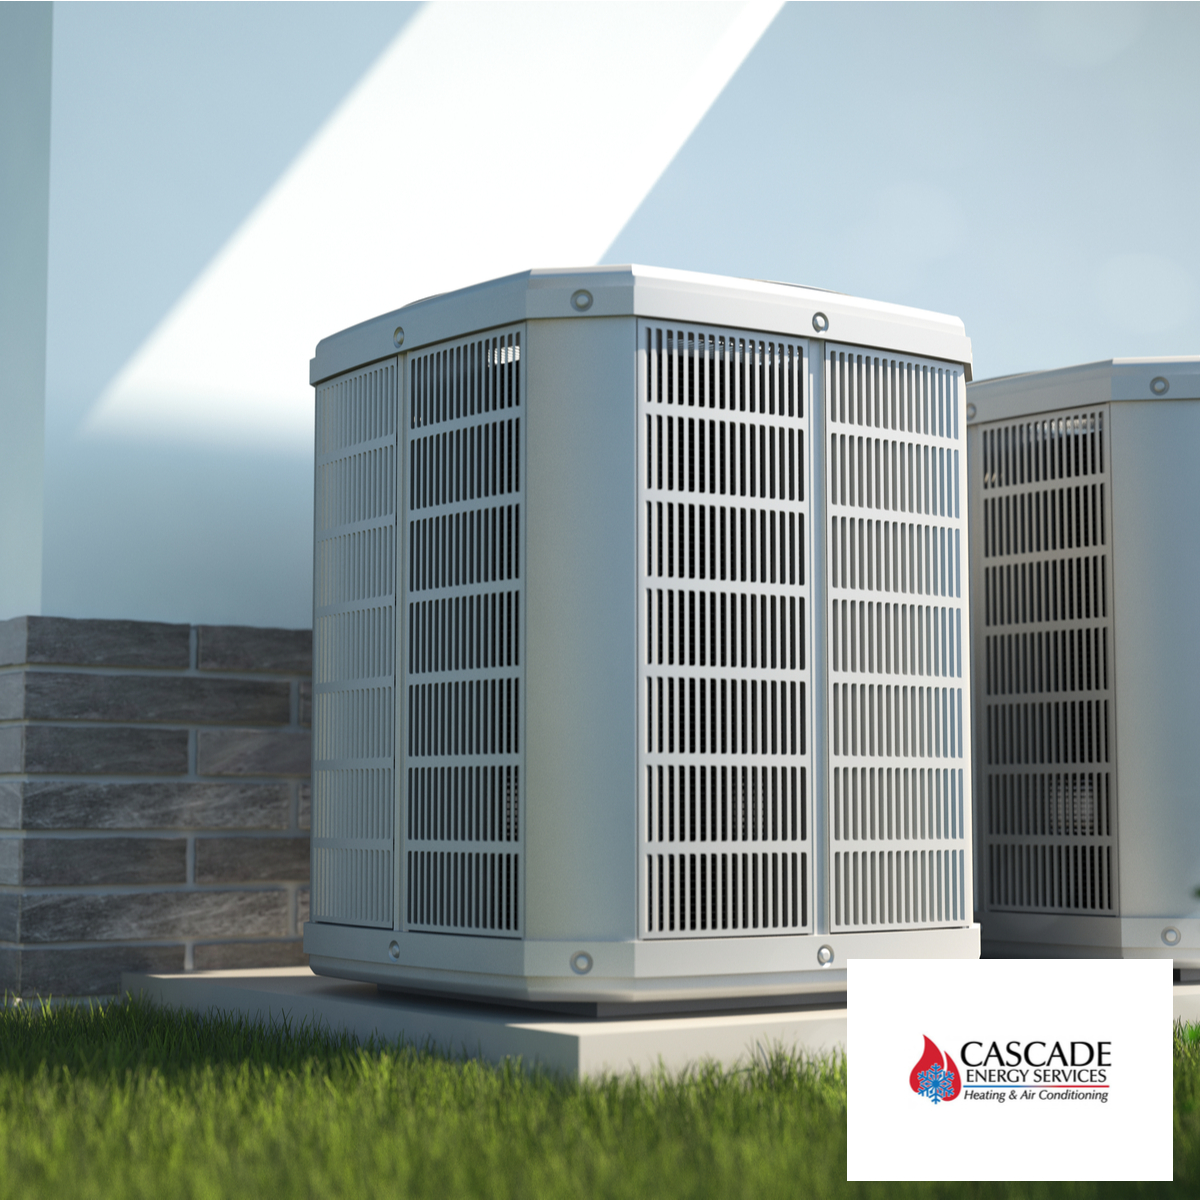 Make a Seasonal Appointment for Your Heat Pump’s Inspection